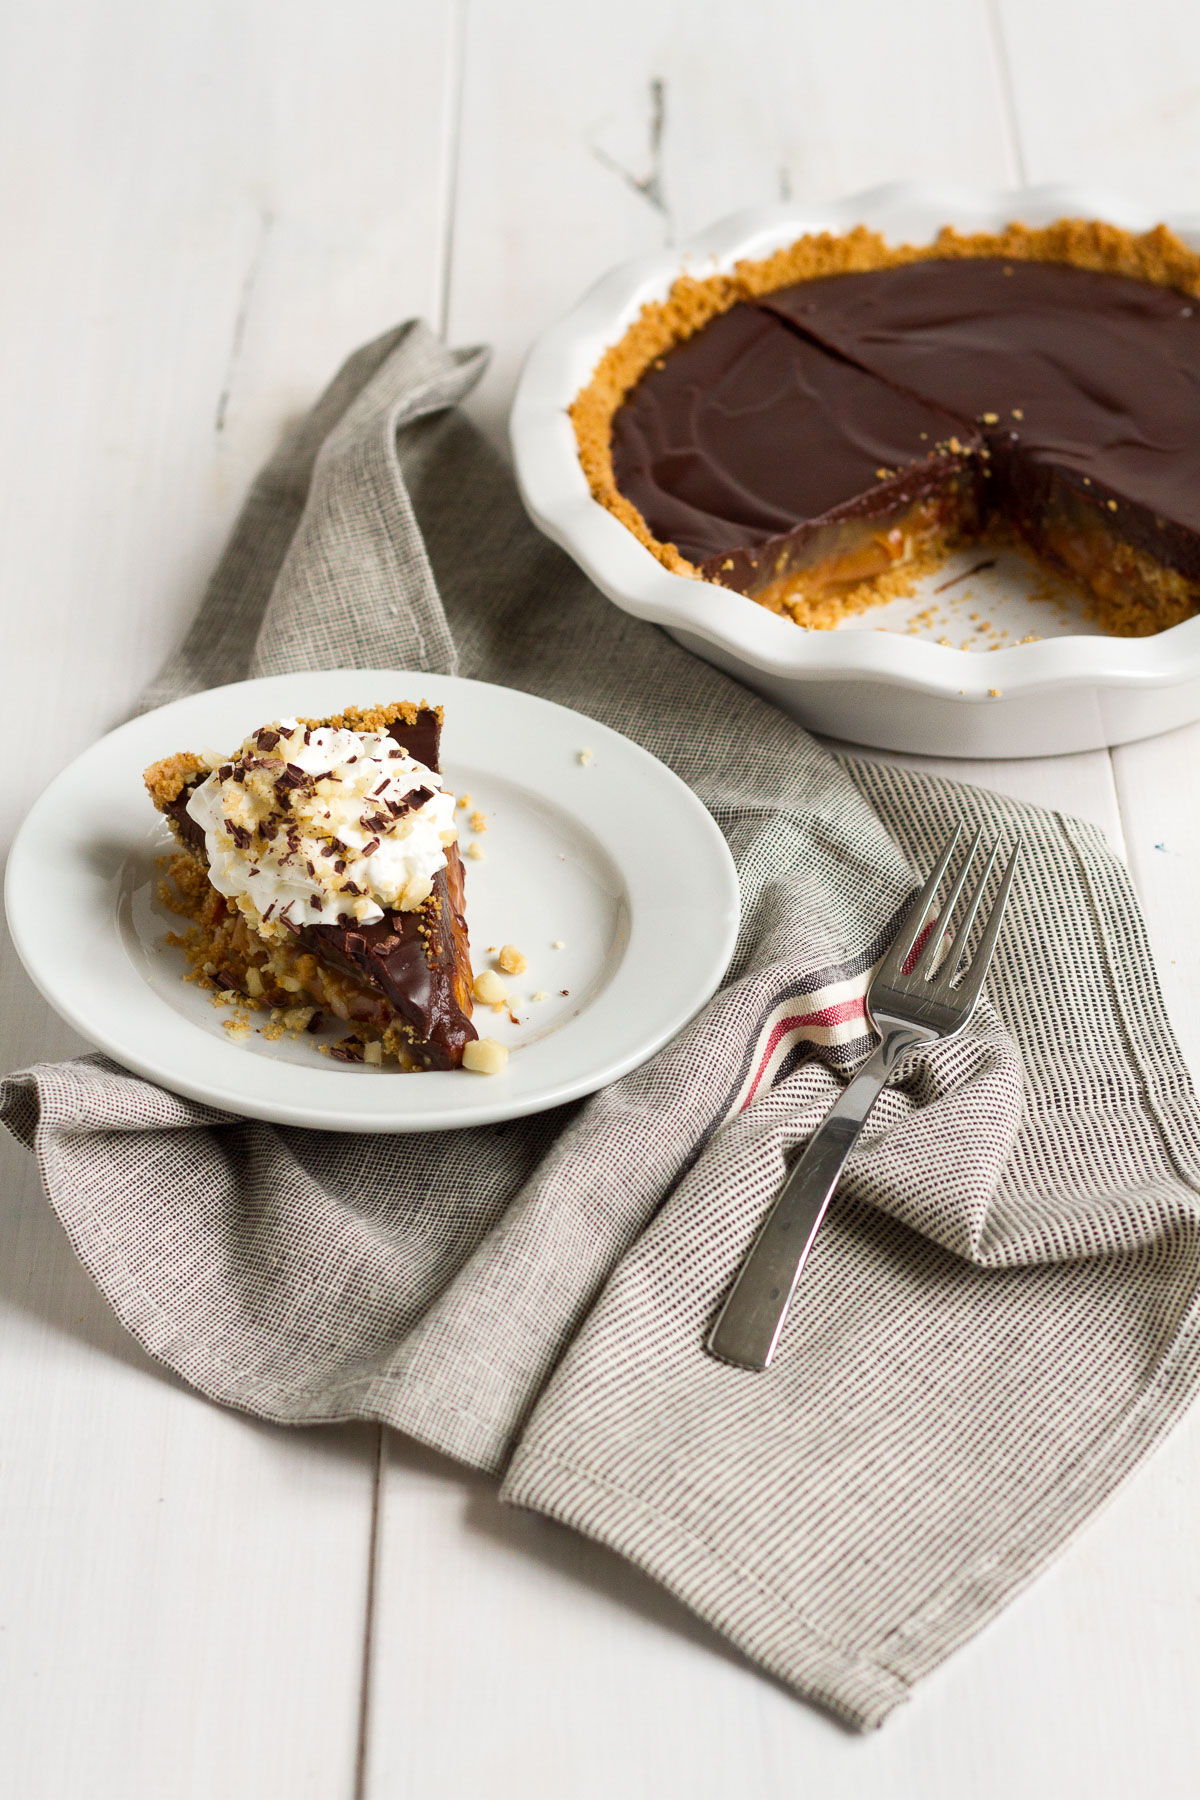 An over-the-top pie featuring a homemade graham cracker crust, a layer of macadamia nut-filled caramel, and a topping of rich chocolate ganache.